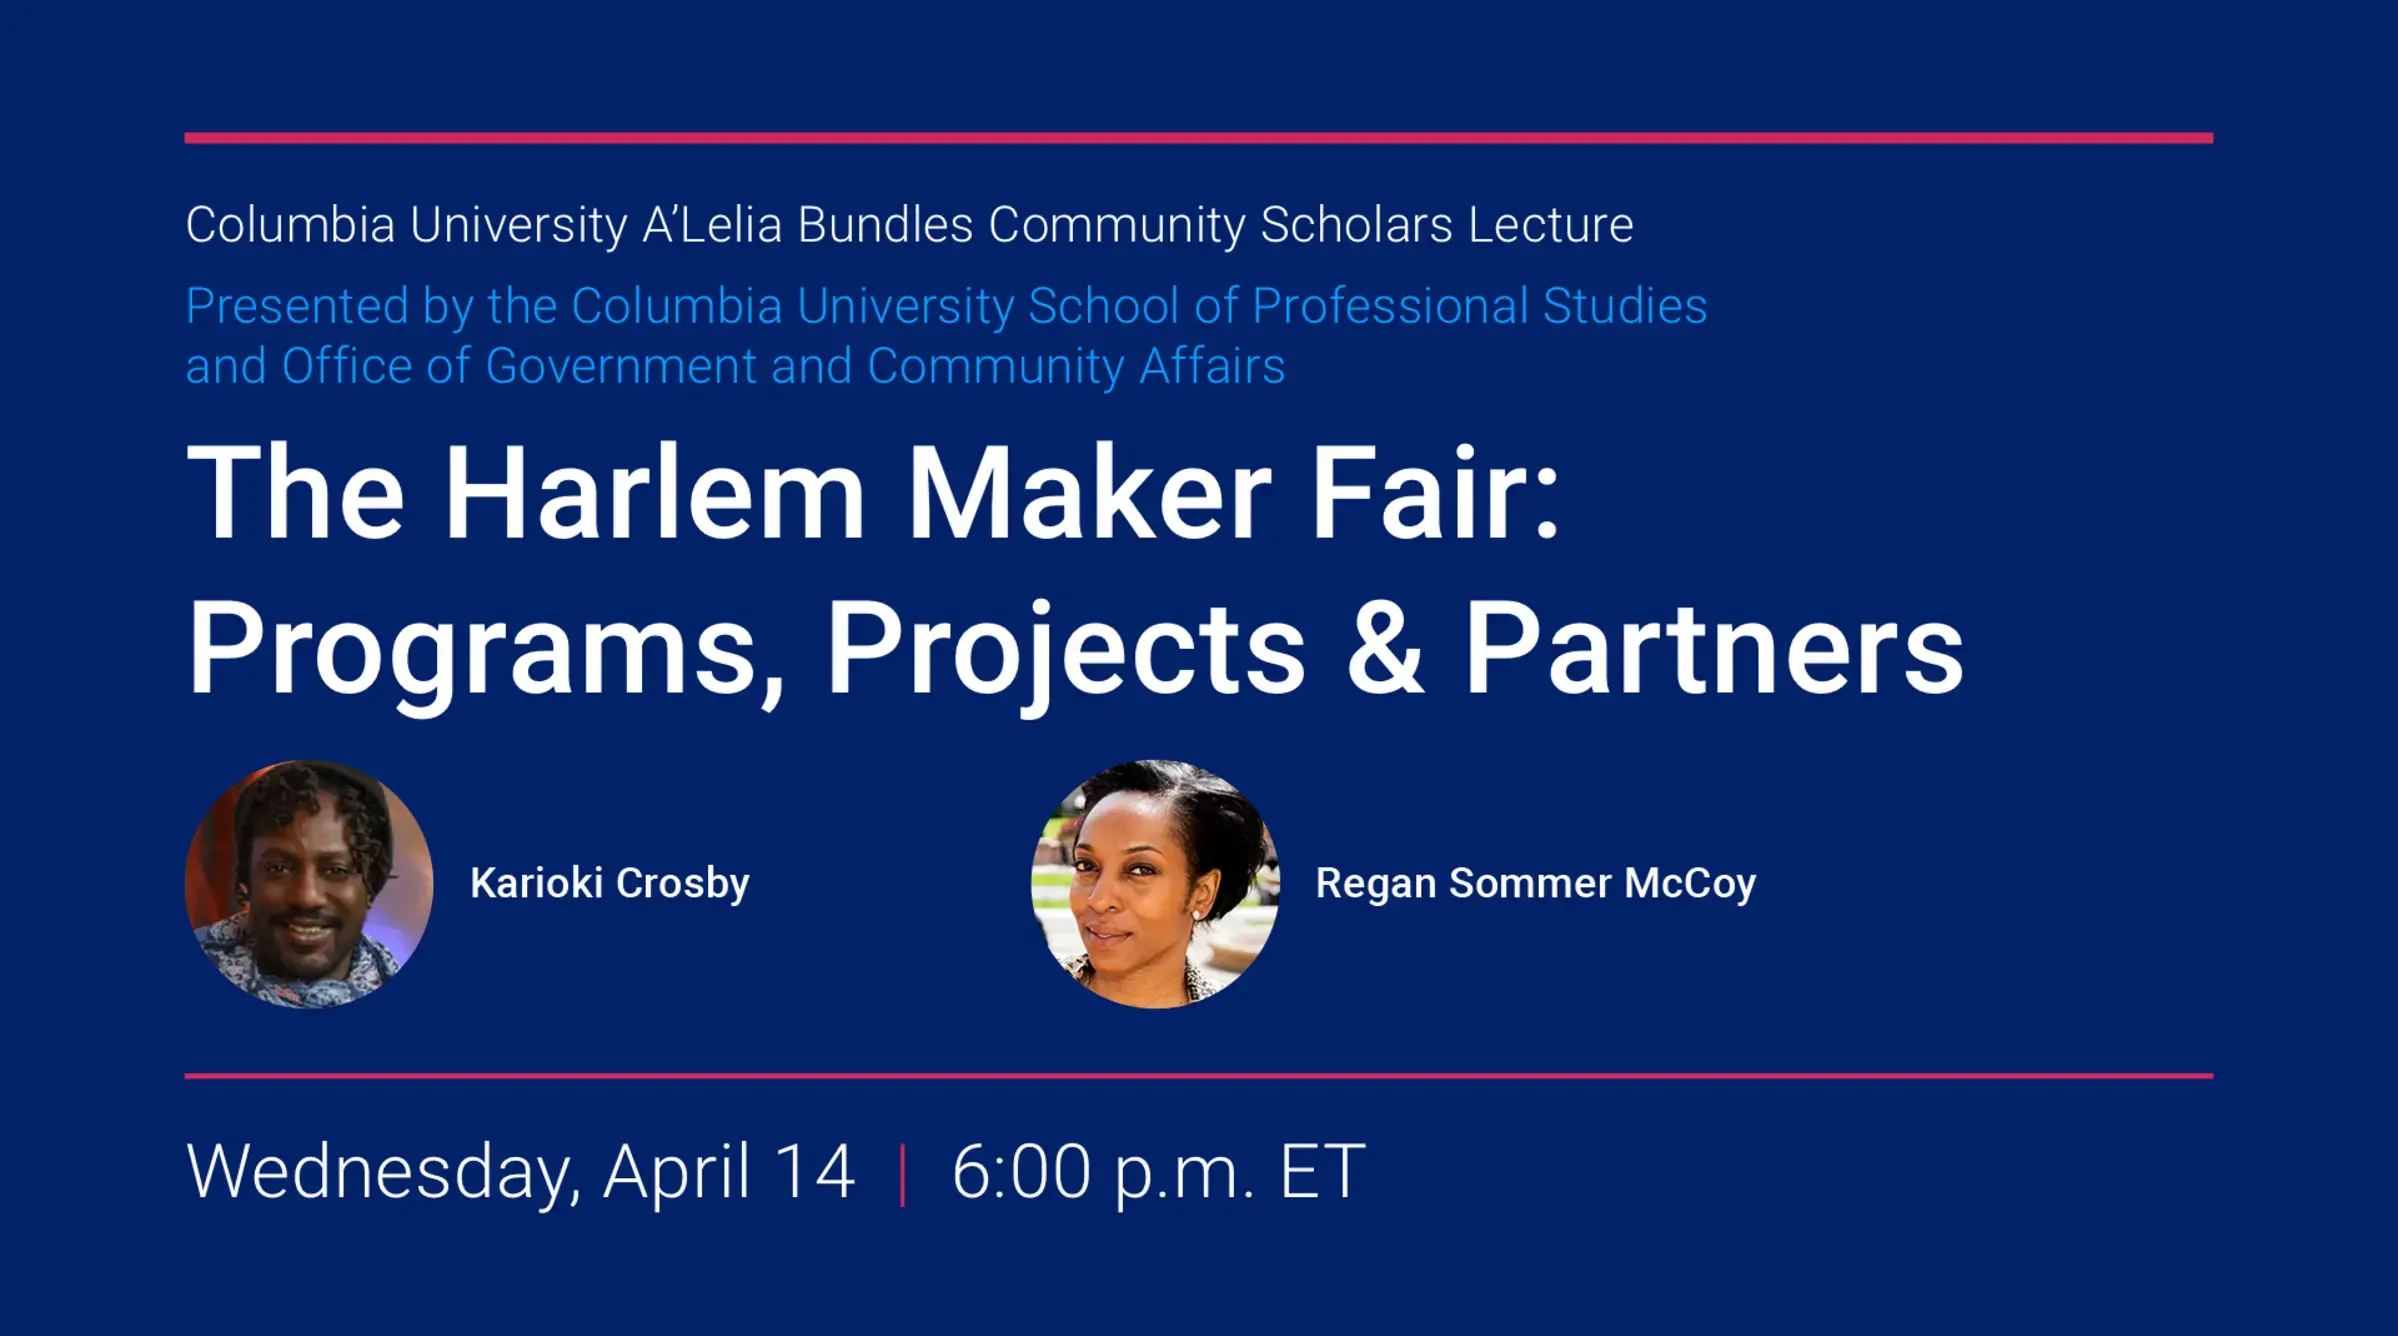 The Harlem Maker Fair: Programs, Projects & Partners